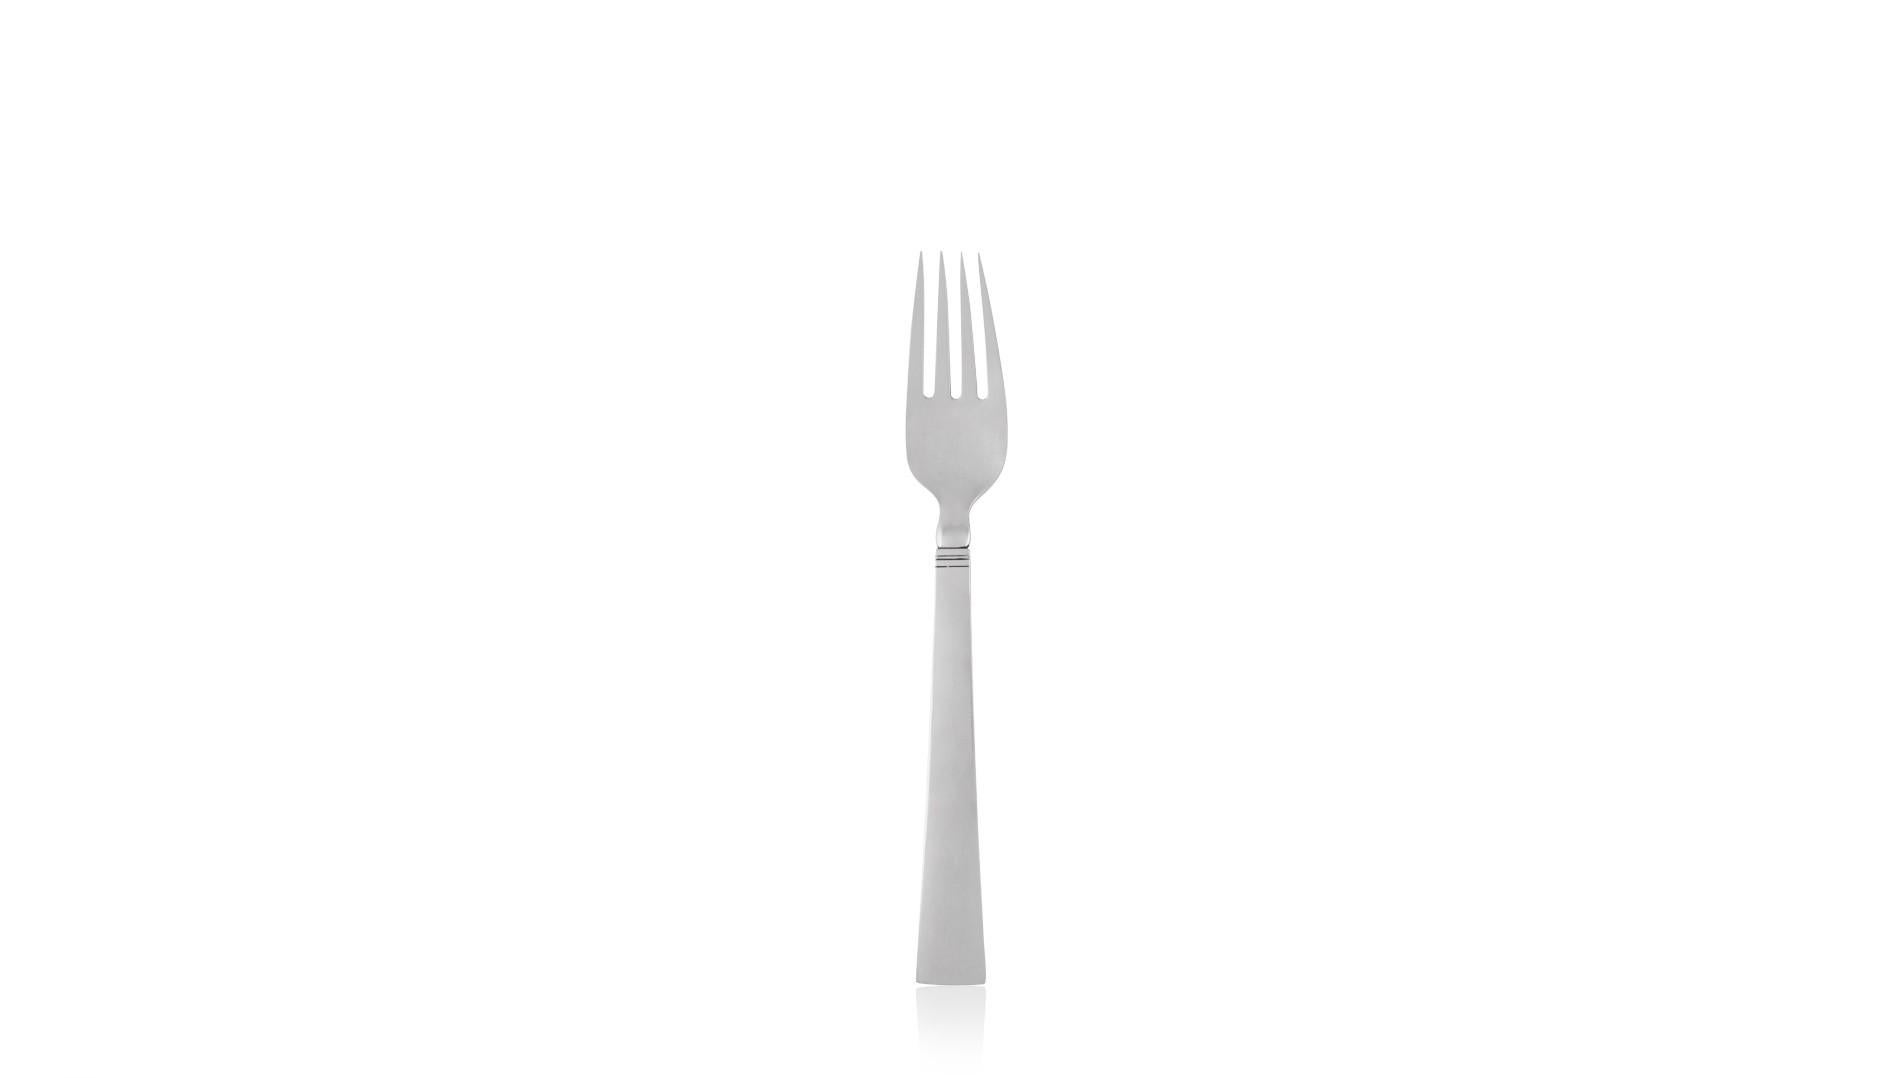 A sterling silver Georg Jensen fish fork, item 061 in the Acadia pattern, design #46 by Ib Just Andersen from 1934.

Additional information:
Material: Sterling silver
Styles: Art Deco
Hallmarks: With Georg Jensen hallmark, made in